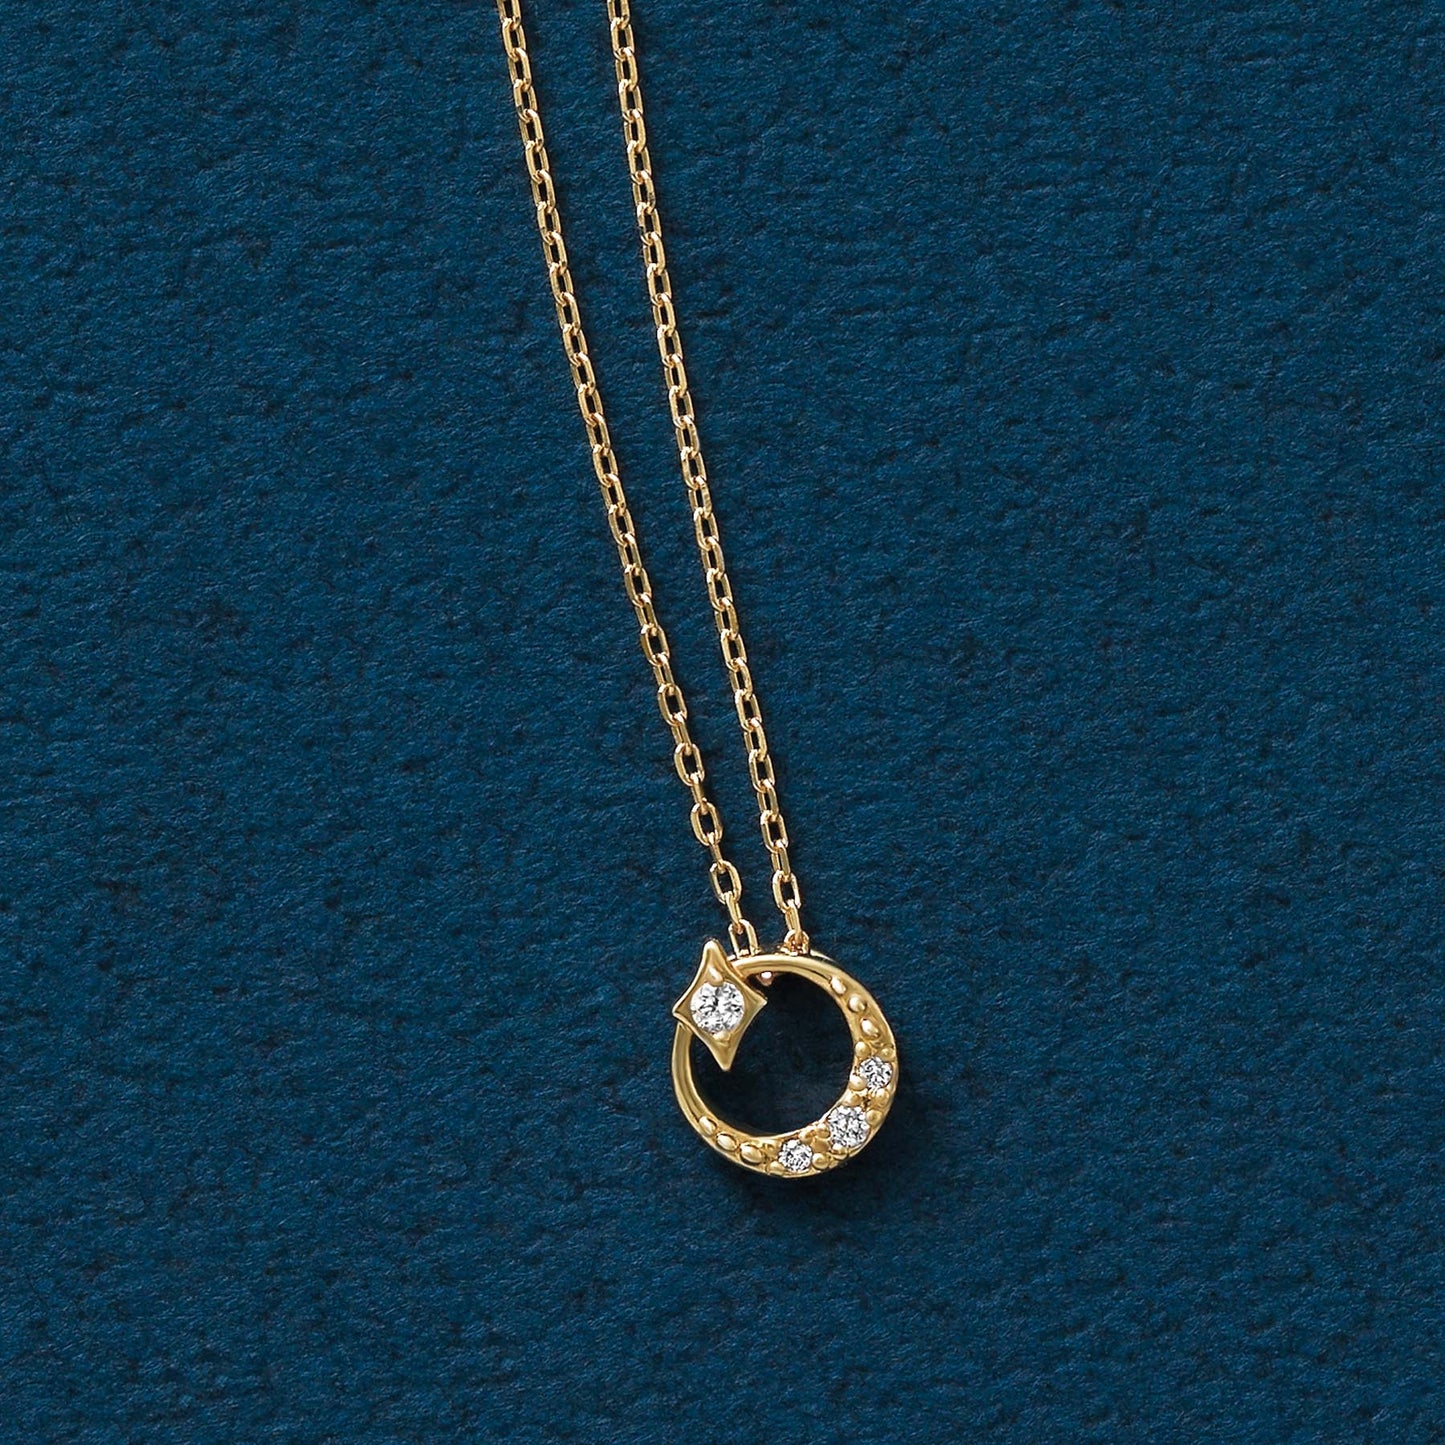 10K Yellow Gold Diamond Crescent Star Necklace - Product Image